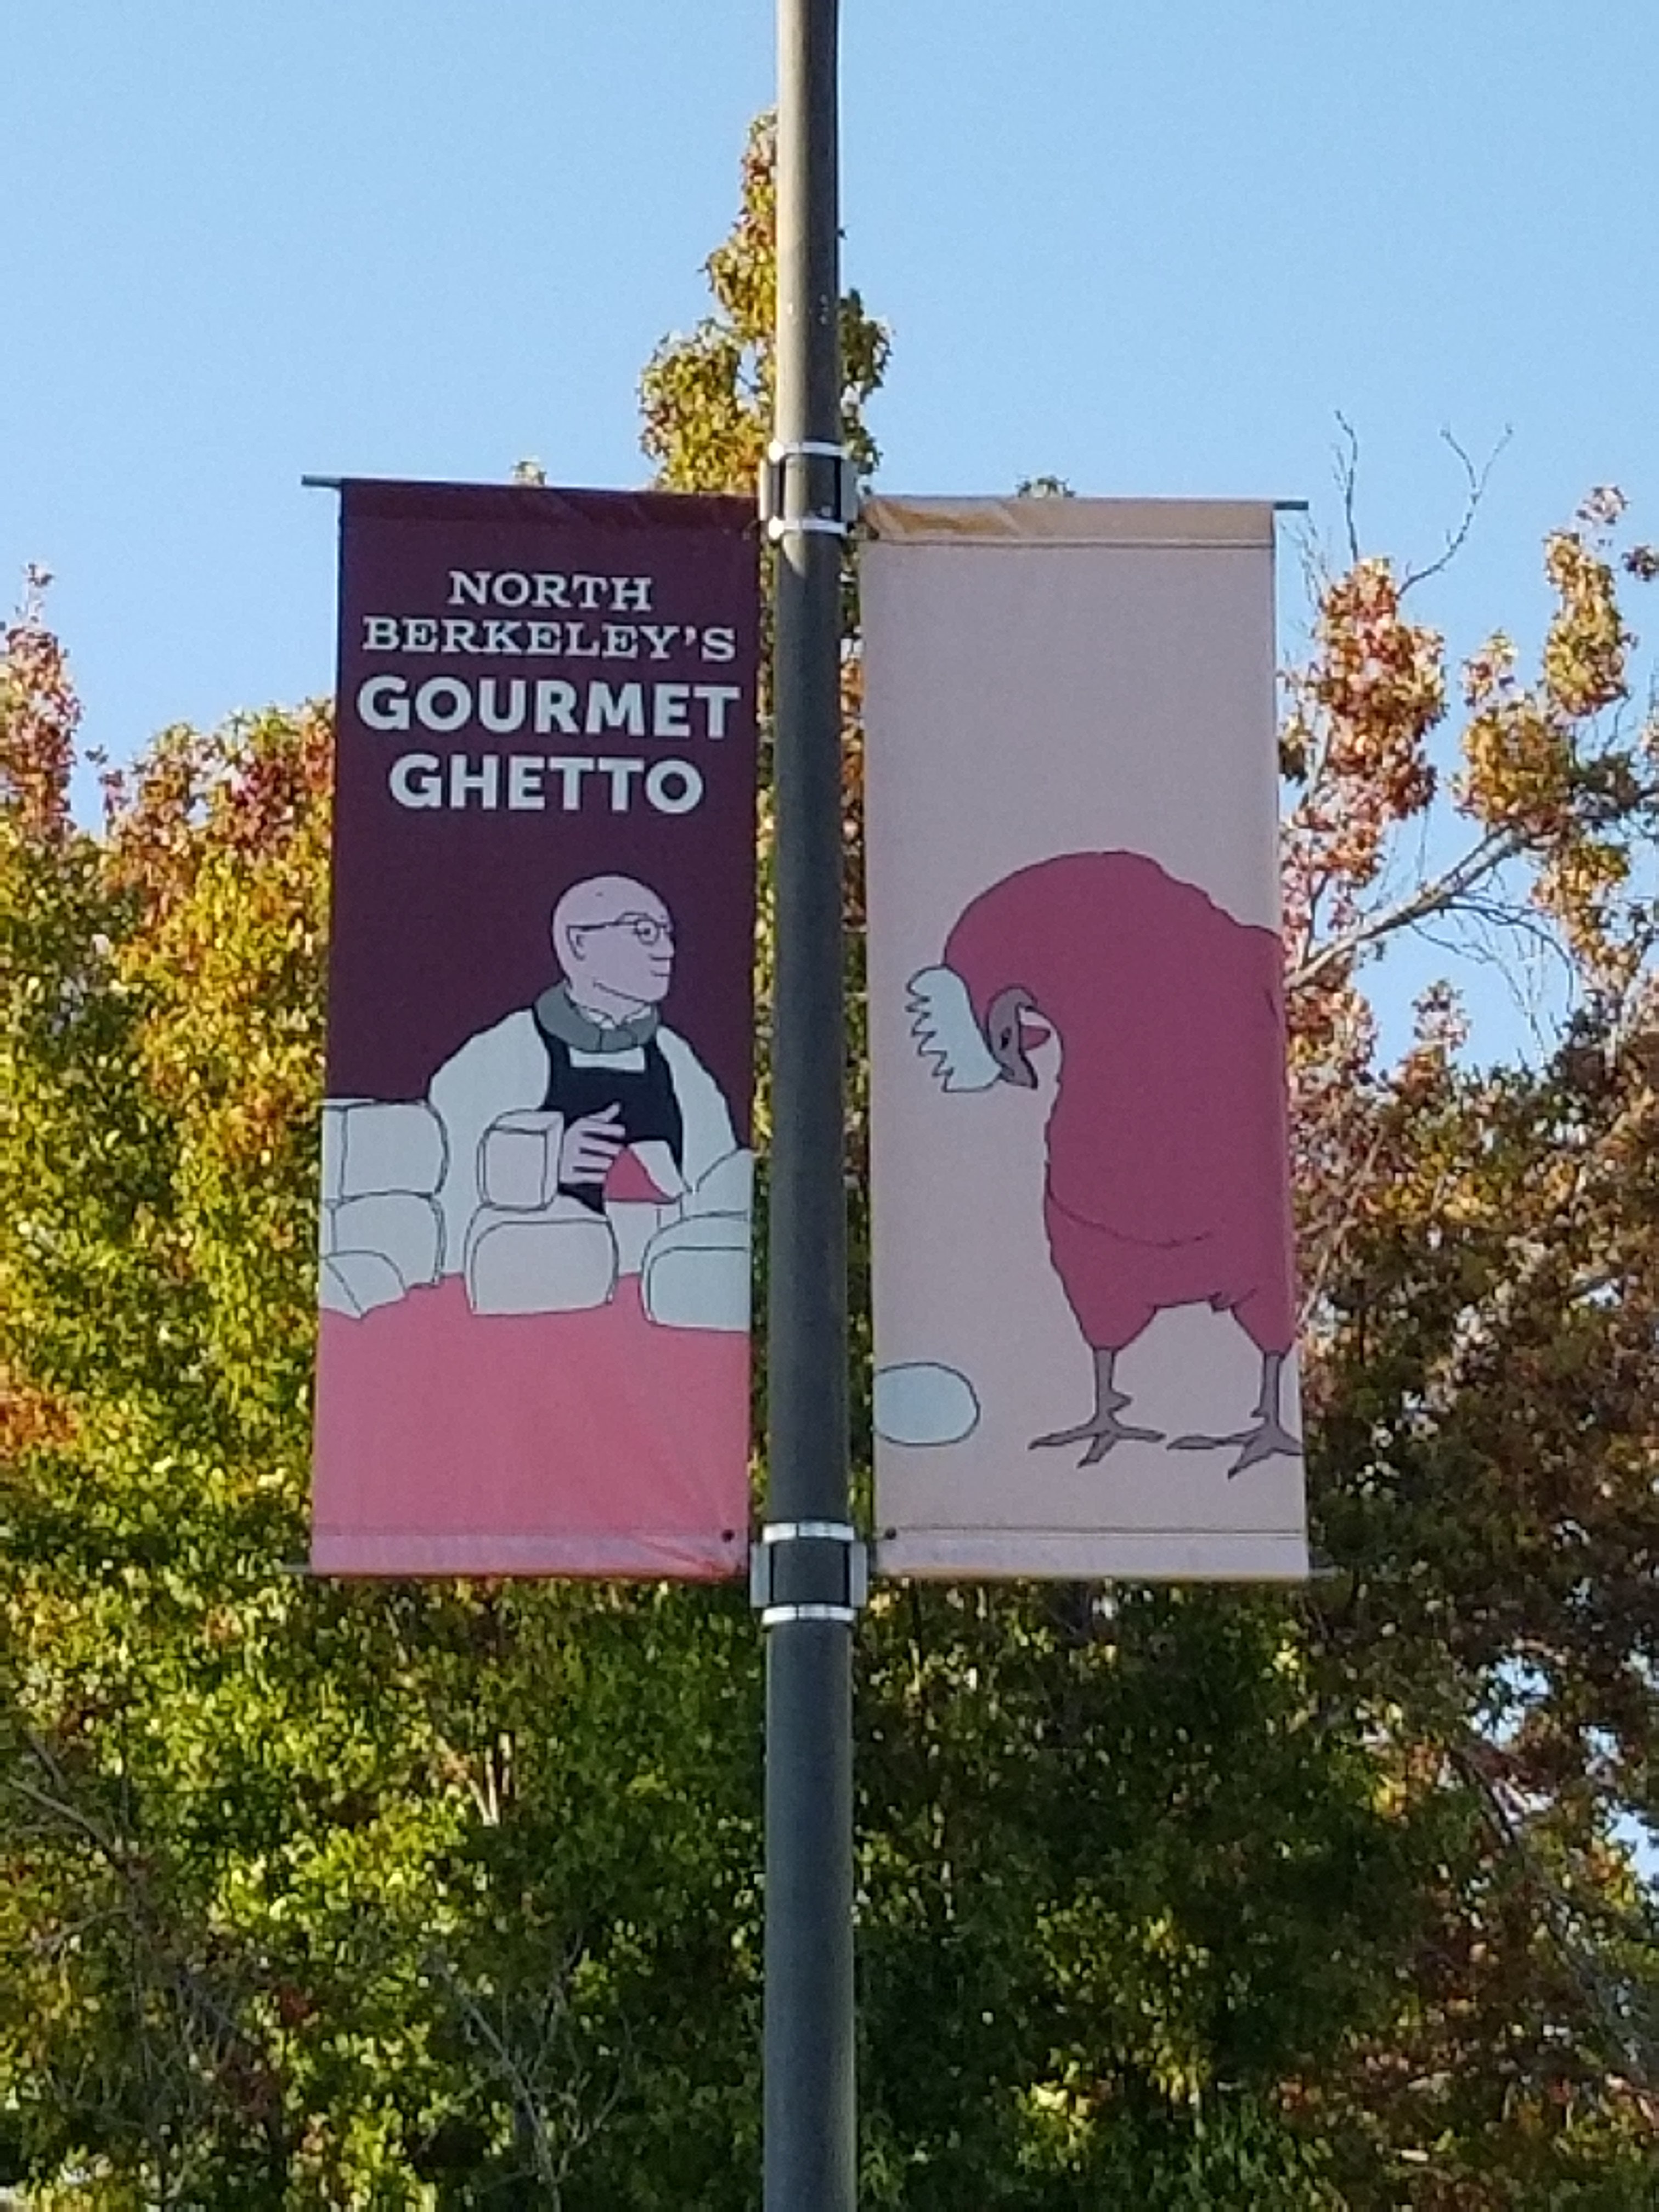 A banner with the phrase “gourmet ghetto” hanging from a lamppost.